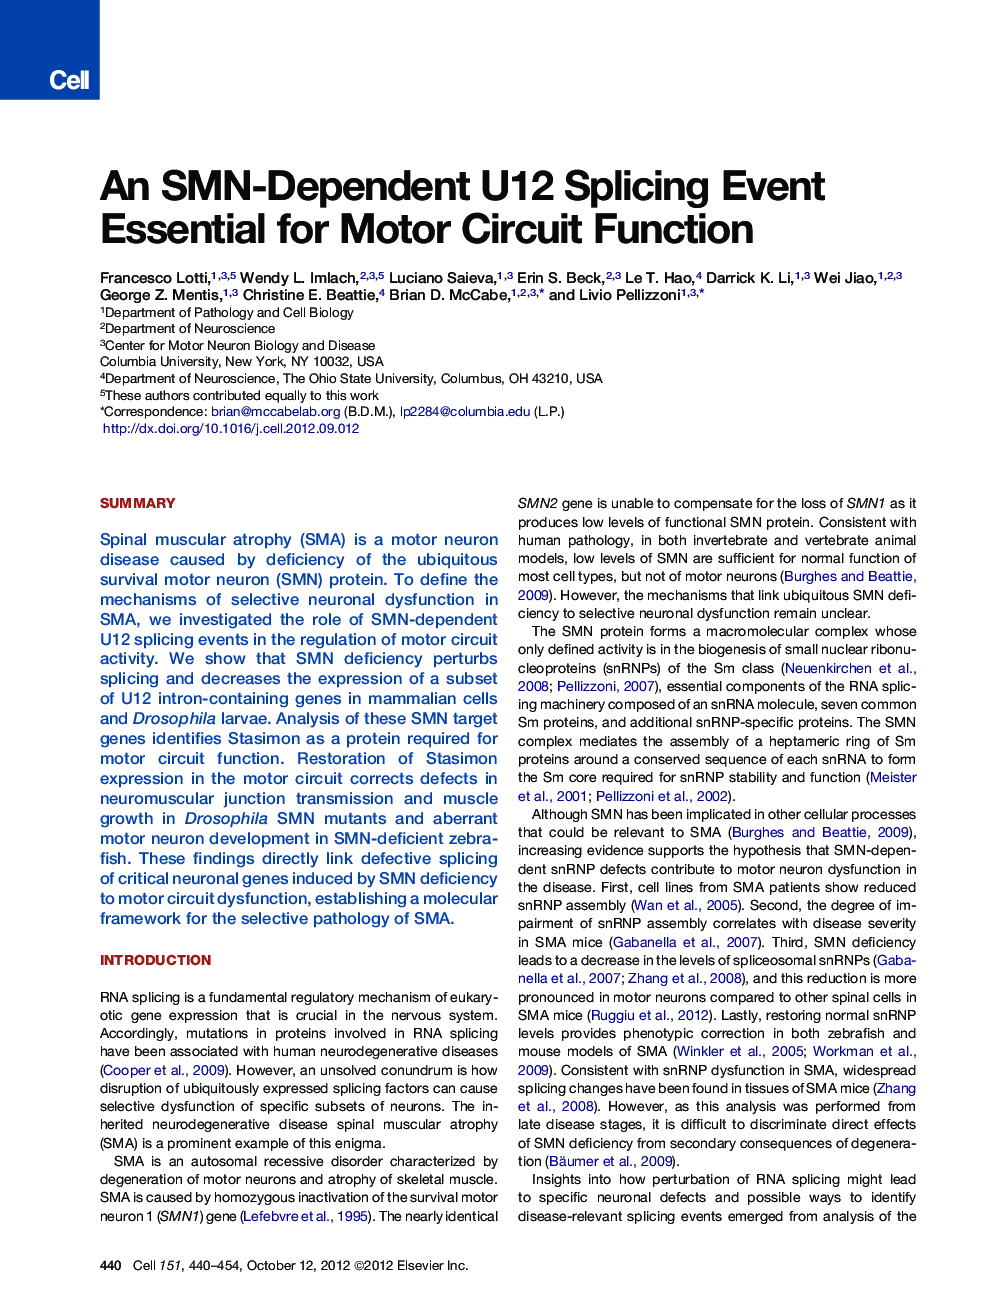 An SMN-Dependent U12 Splicing Event Essential for Motor Circuit Function